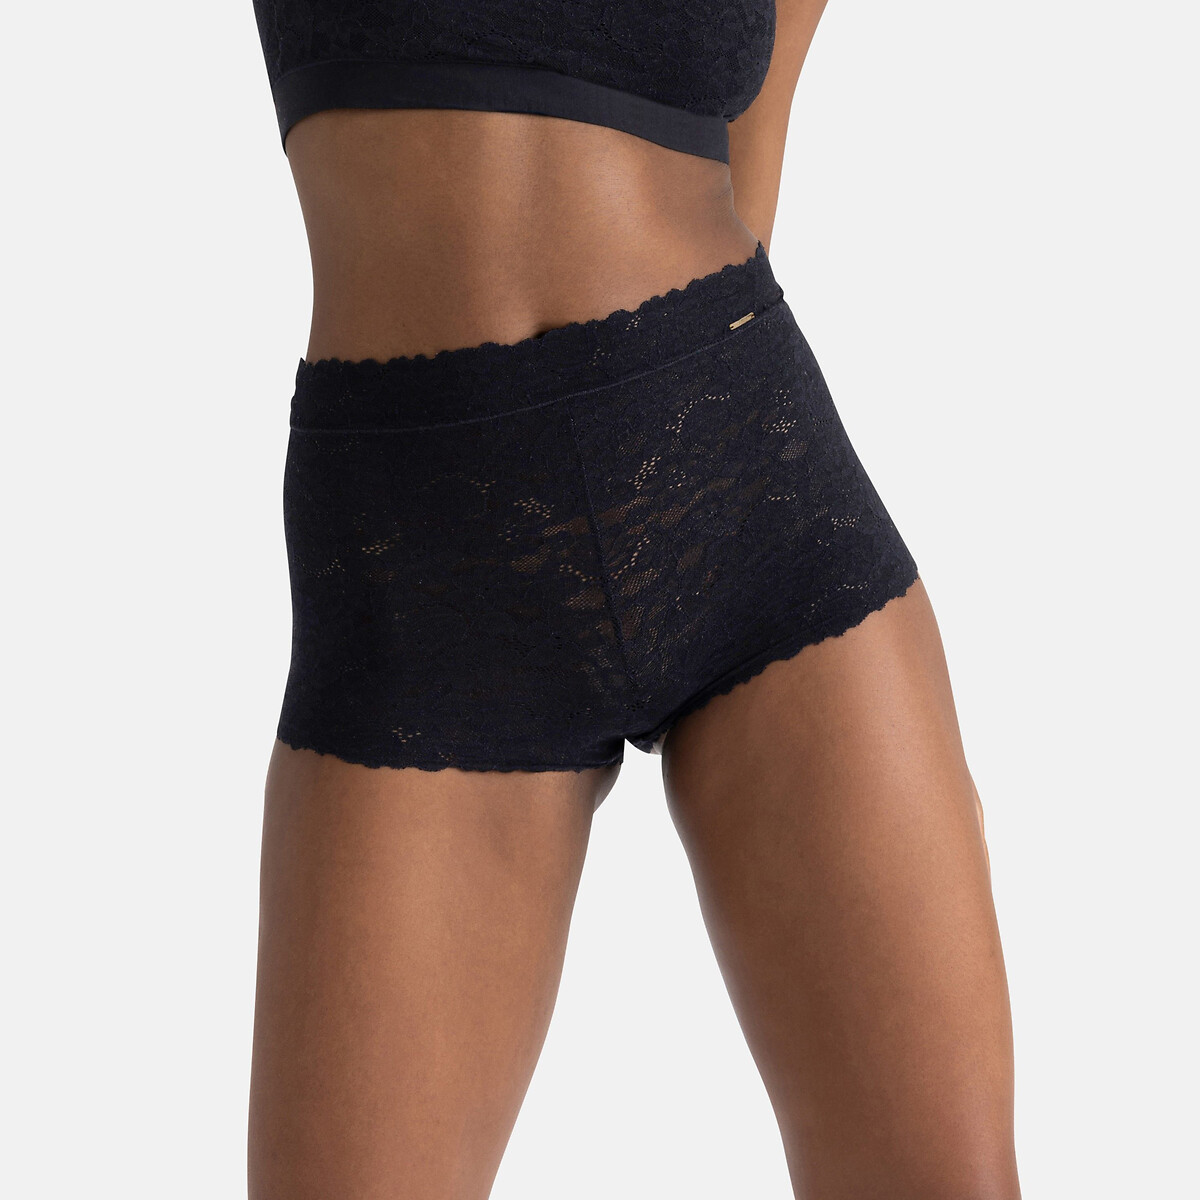 Image of Unifit Lace Shorts, One Size Fits All